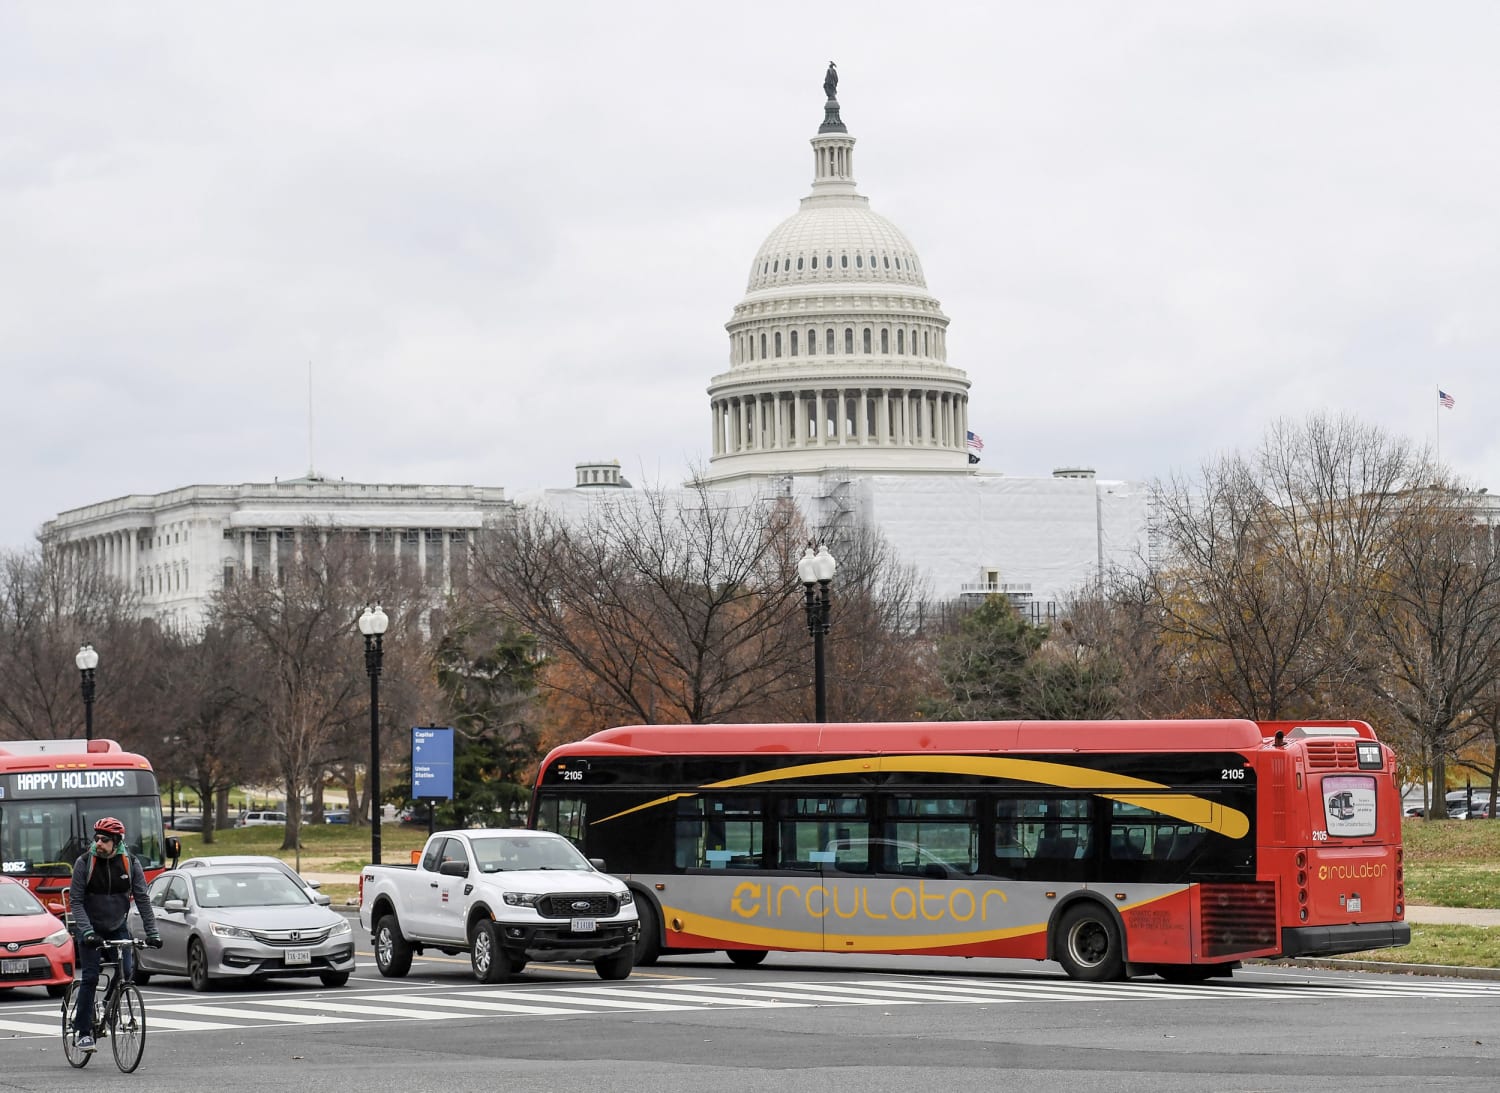 Cities are experimenting with free buses. So far, so good.